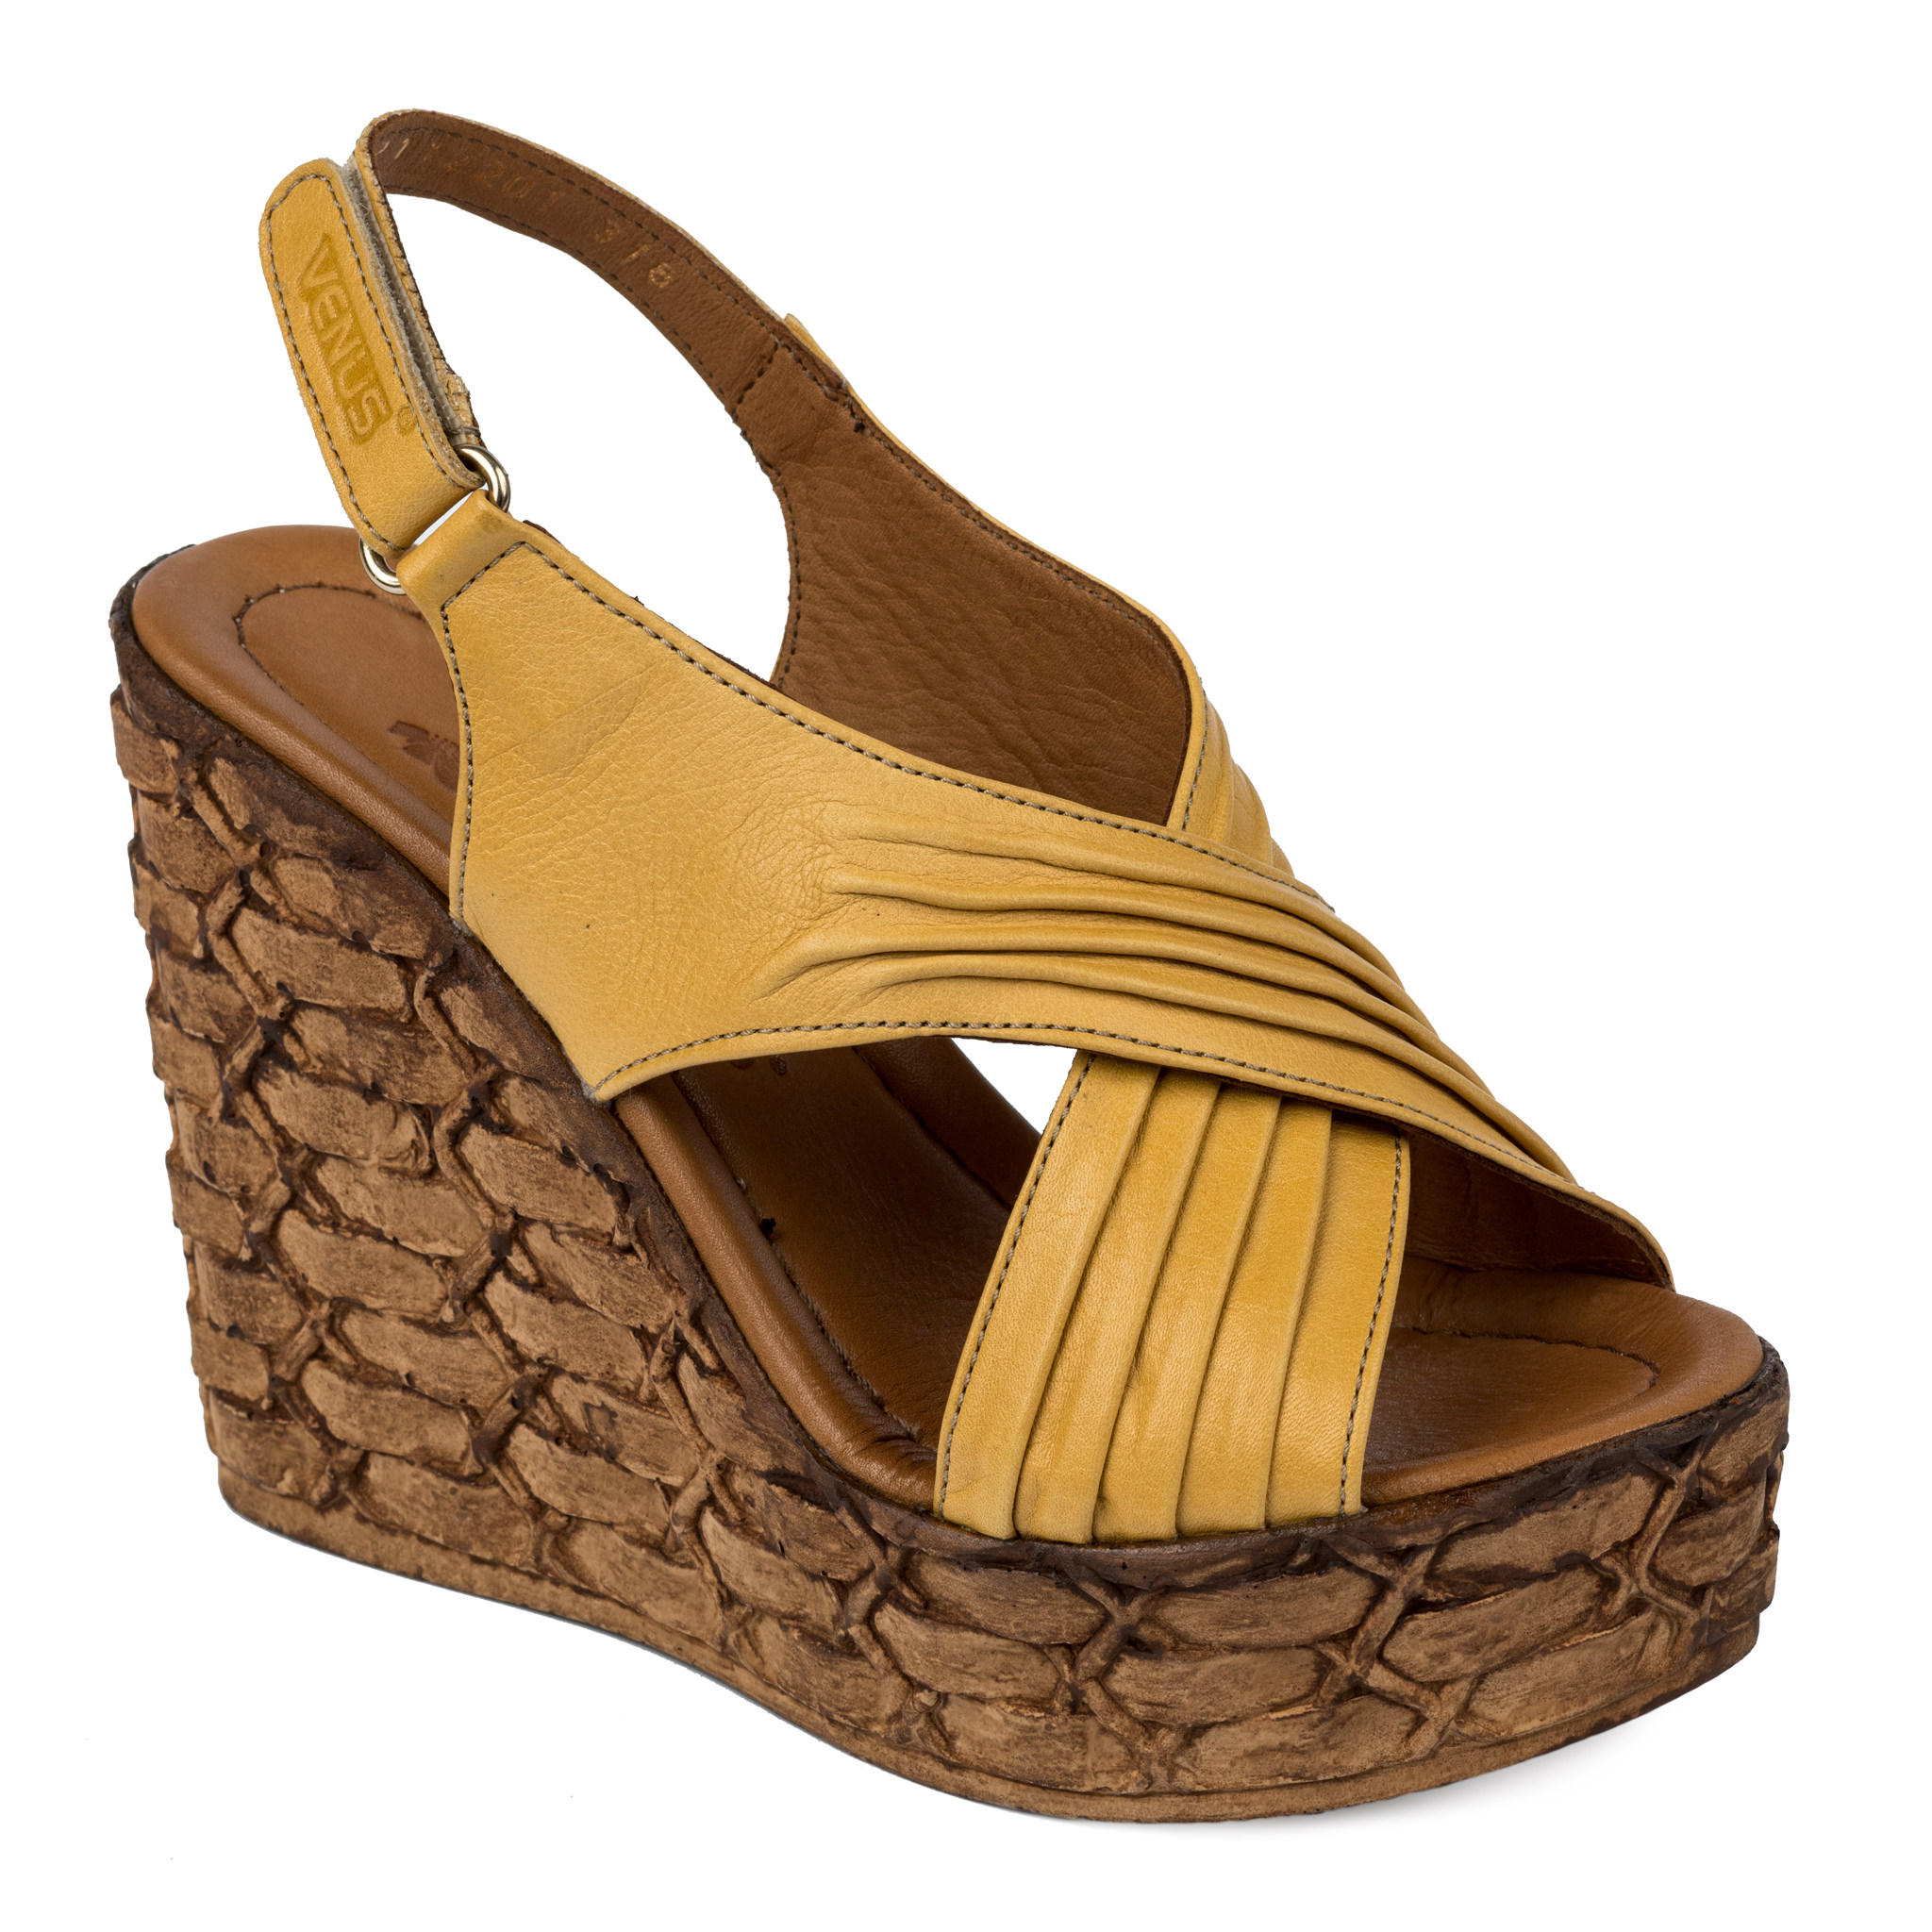 Leather sandals A256 - YELLOW